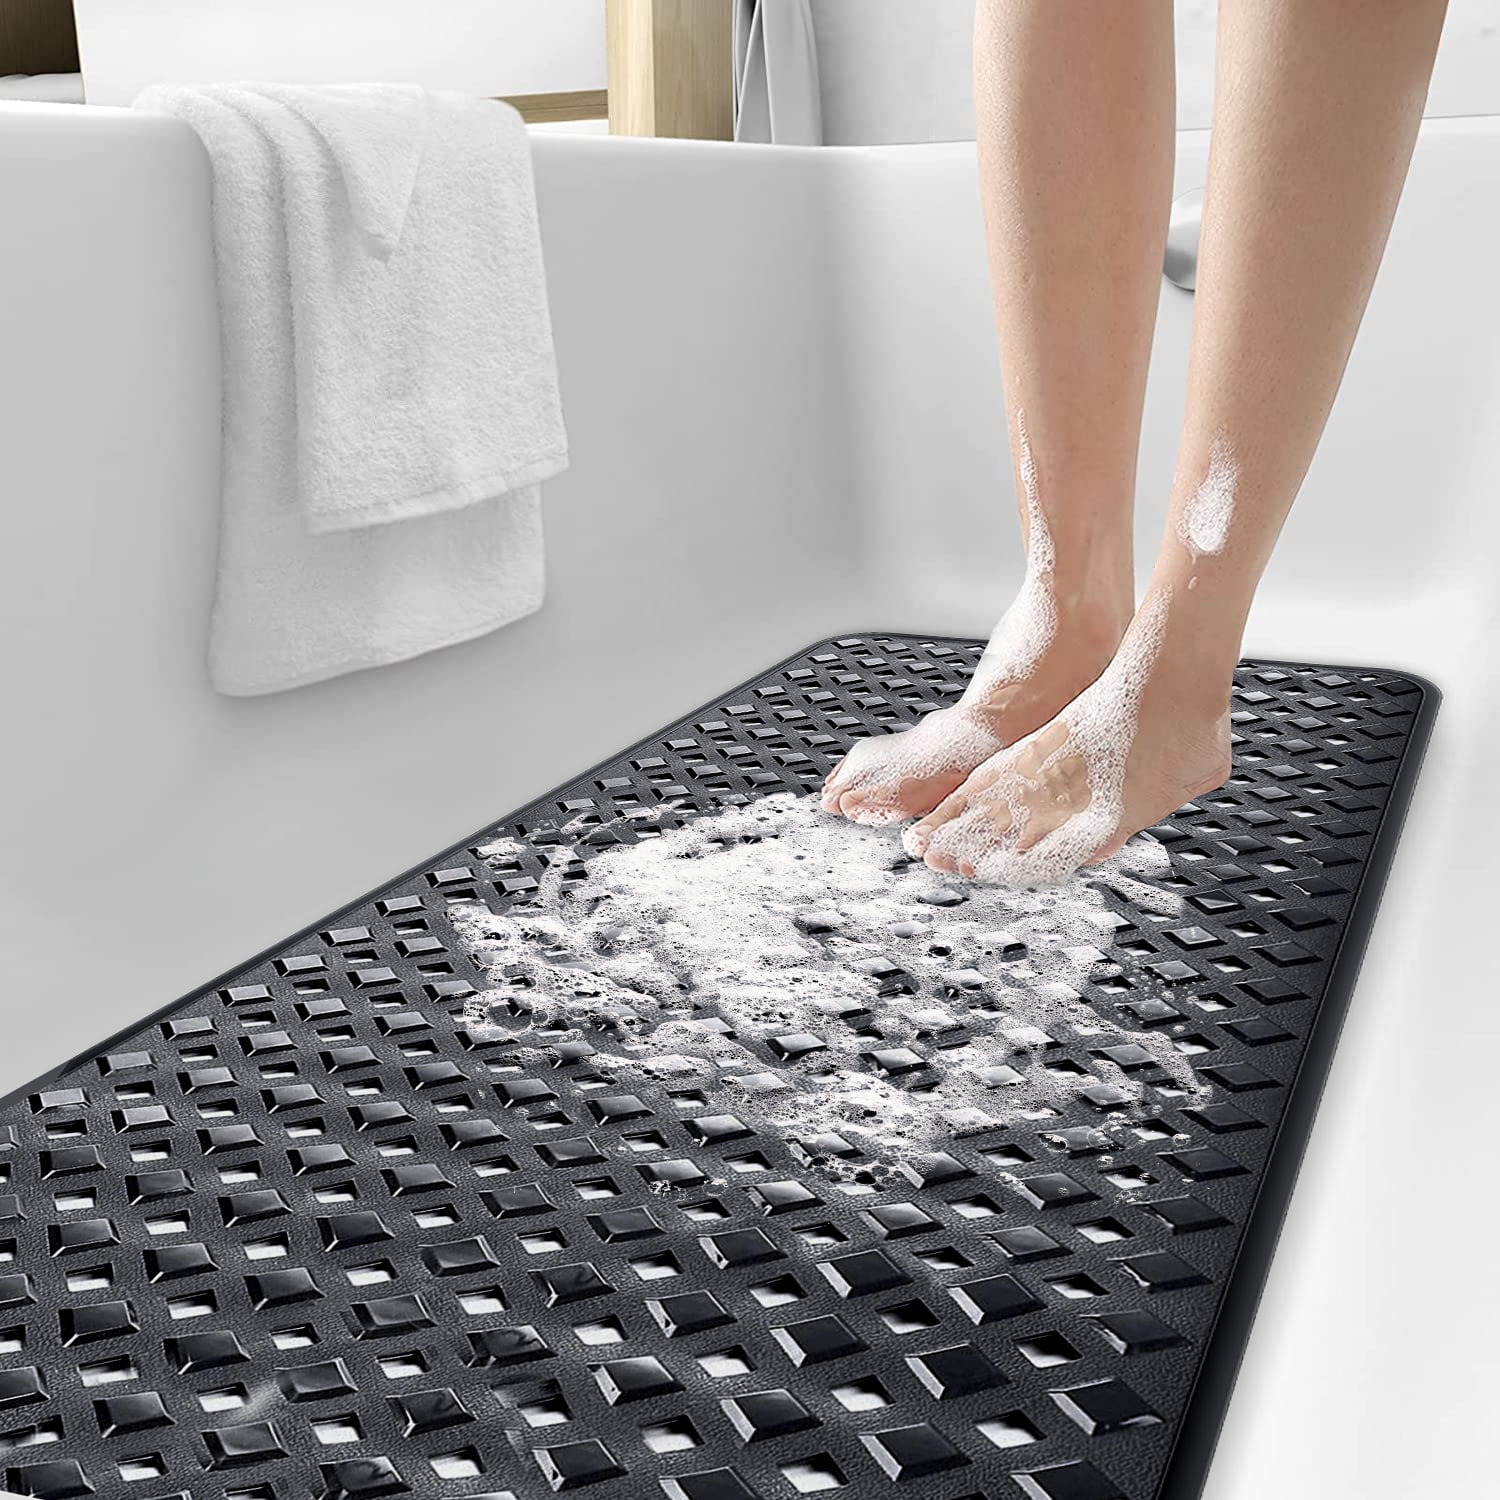 DMI Extra-Long Non-Slip Suction Cup Bath & Shower Mat, 40 in